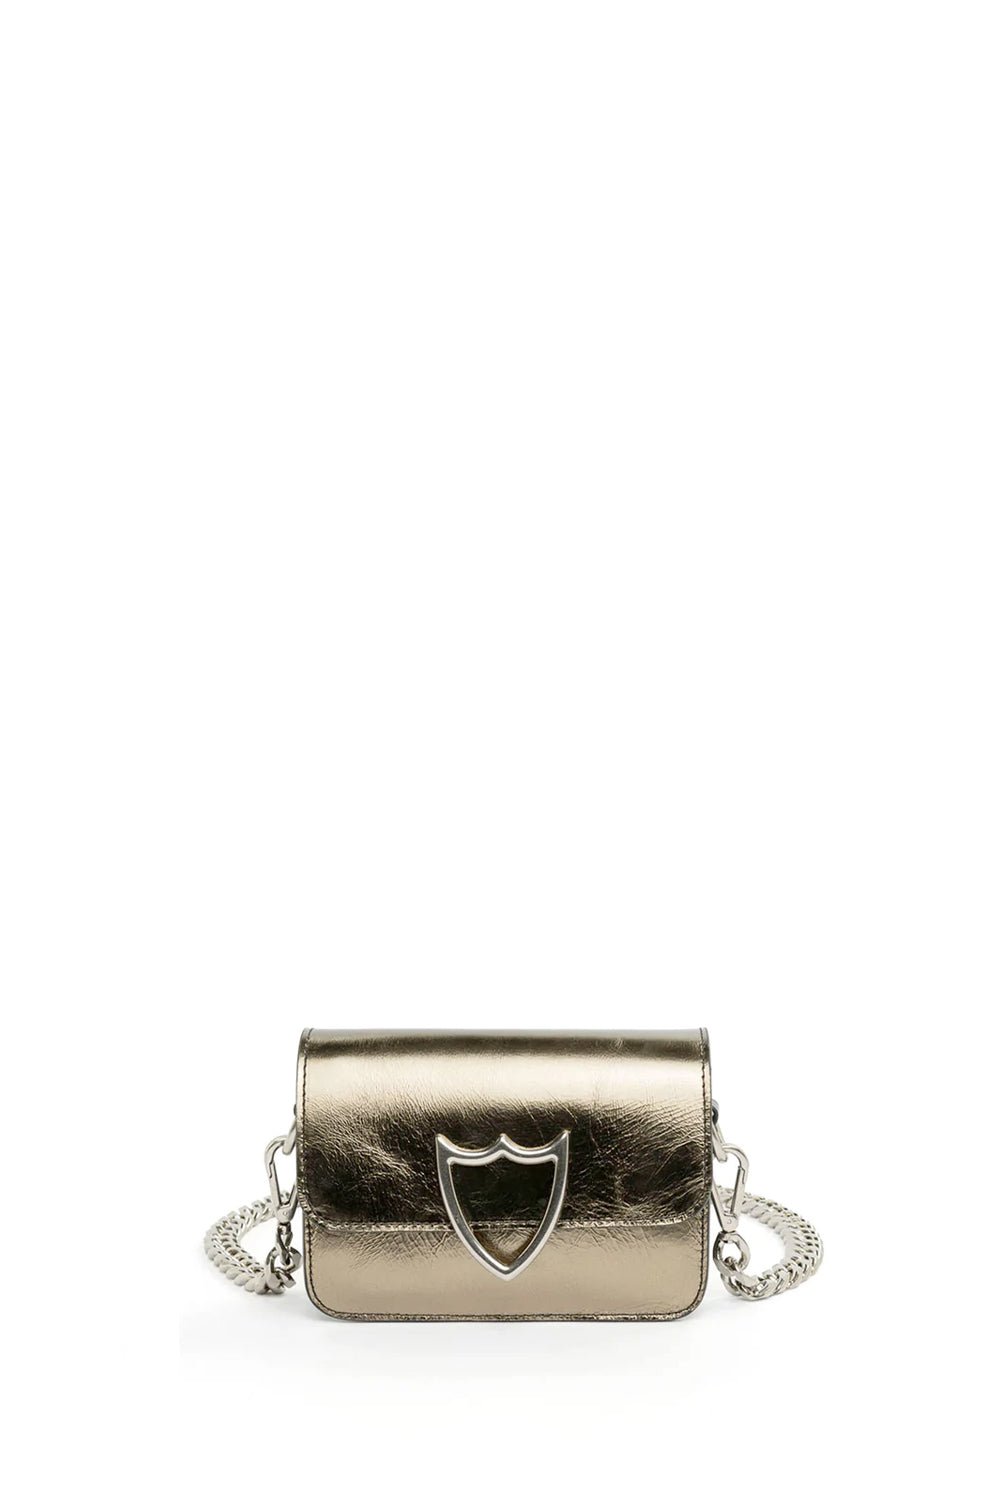 L.A. METAL MINI BAG Metallic leather mini bag. Front flap with snap button closure. Front silver colored metal logo detail. One internal patch pocket. Leather lining. Shoulder leather strap and metal chain little strap. Made in Italy. 100% Leather. Lenght